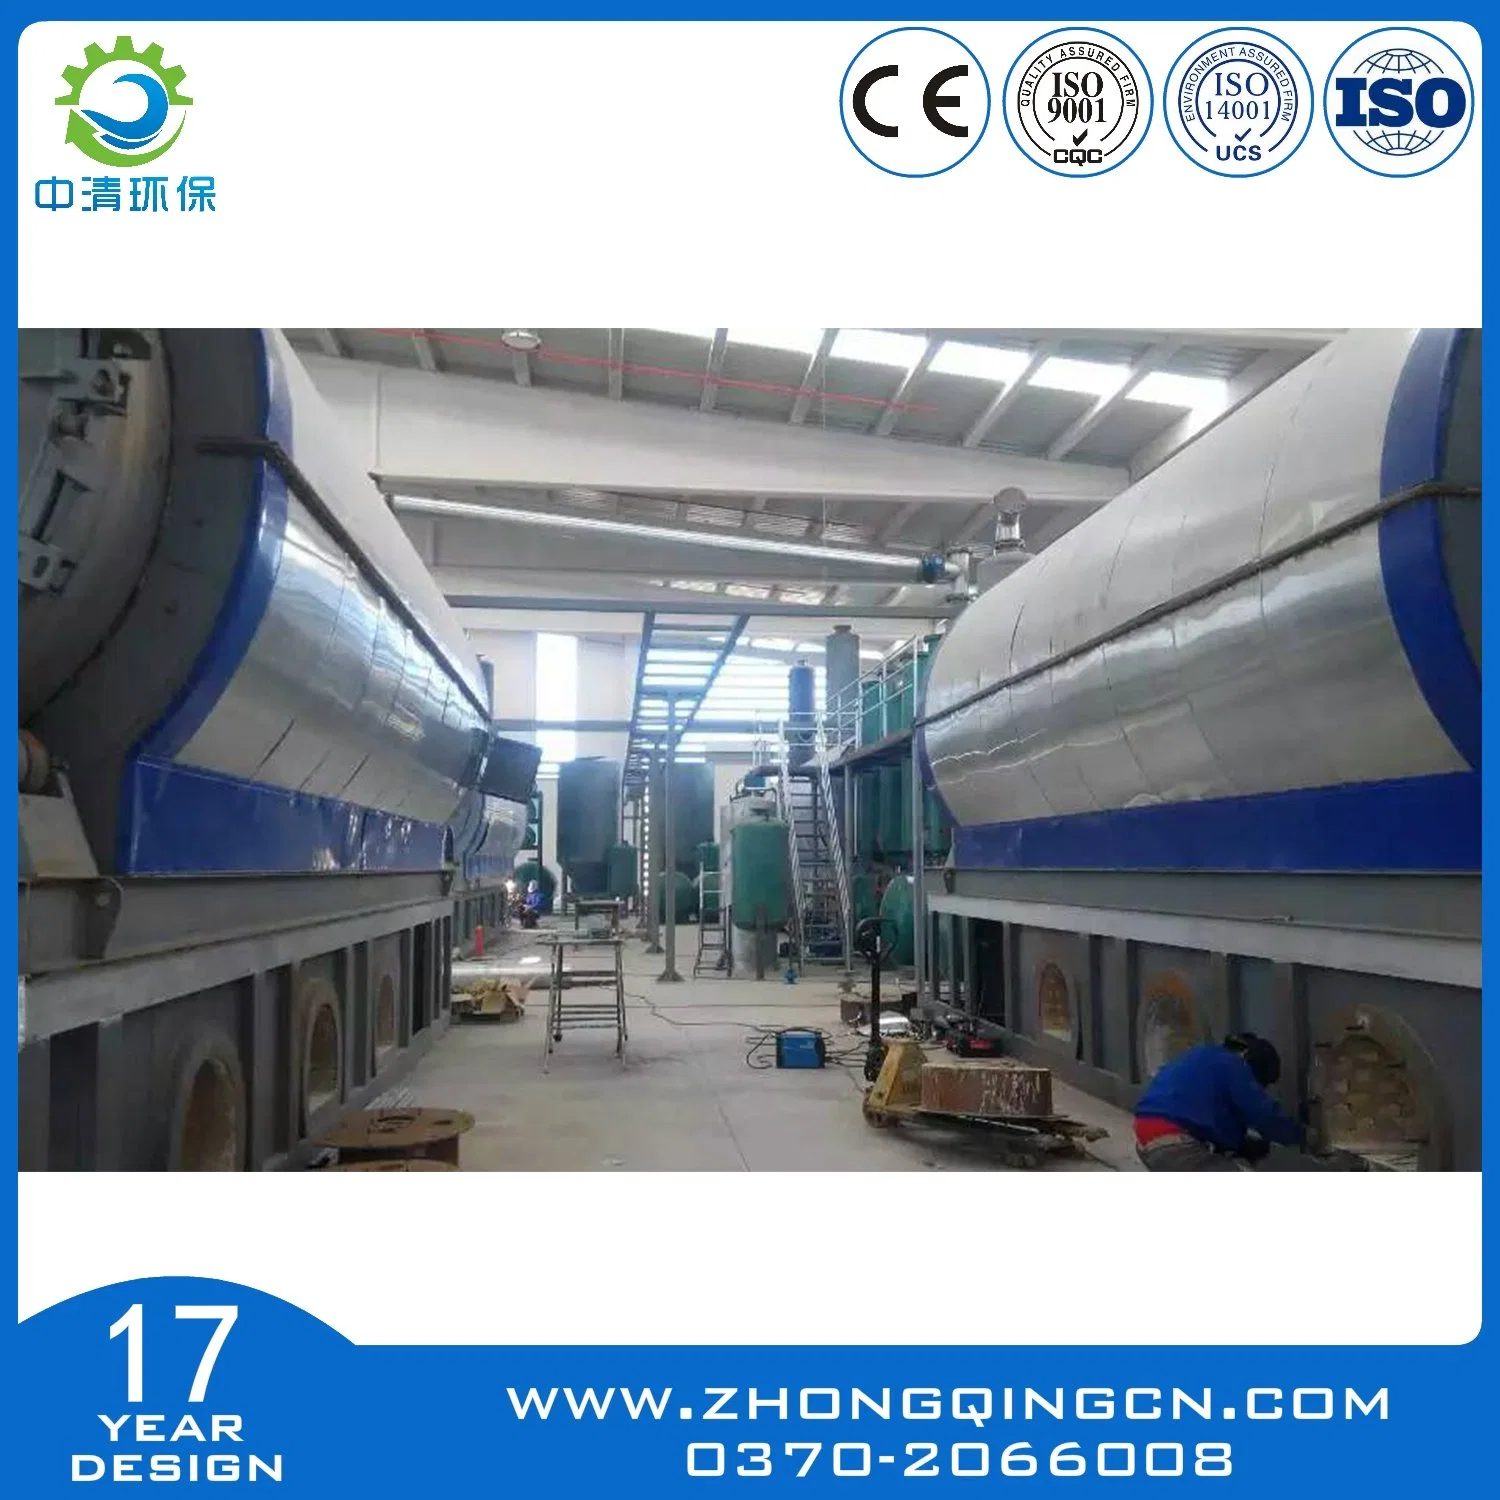 Waste Tires/Waste Plastics/Waste Rubber Pyrolysis Plant/Waste Treatment Equipment/Recycling Plant/Processing Plant to Oil with EU Standard